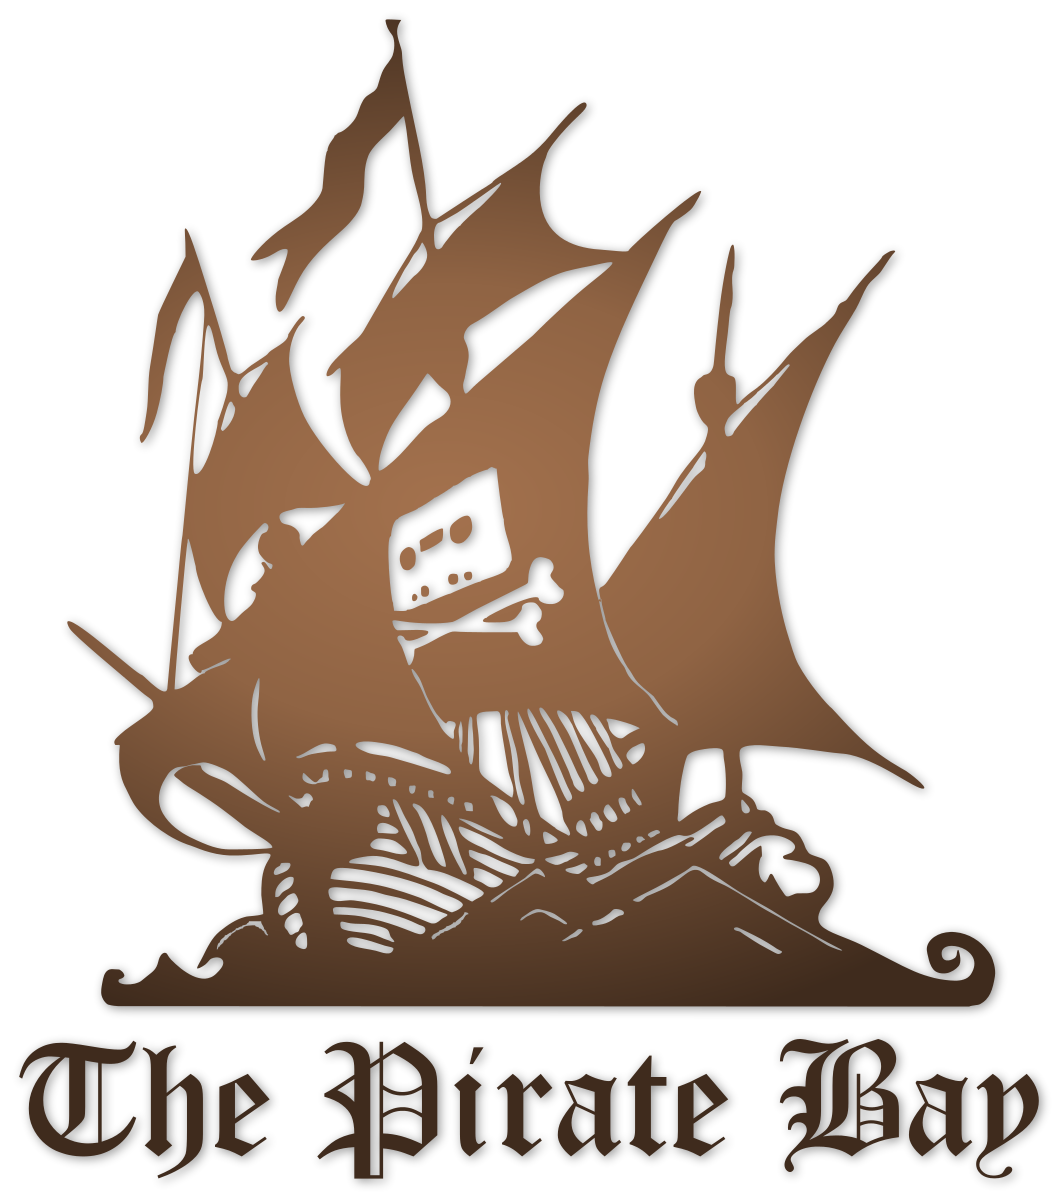 Convicted Pirate Bay Co-Founder Says Site Should Stay Shuttered